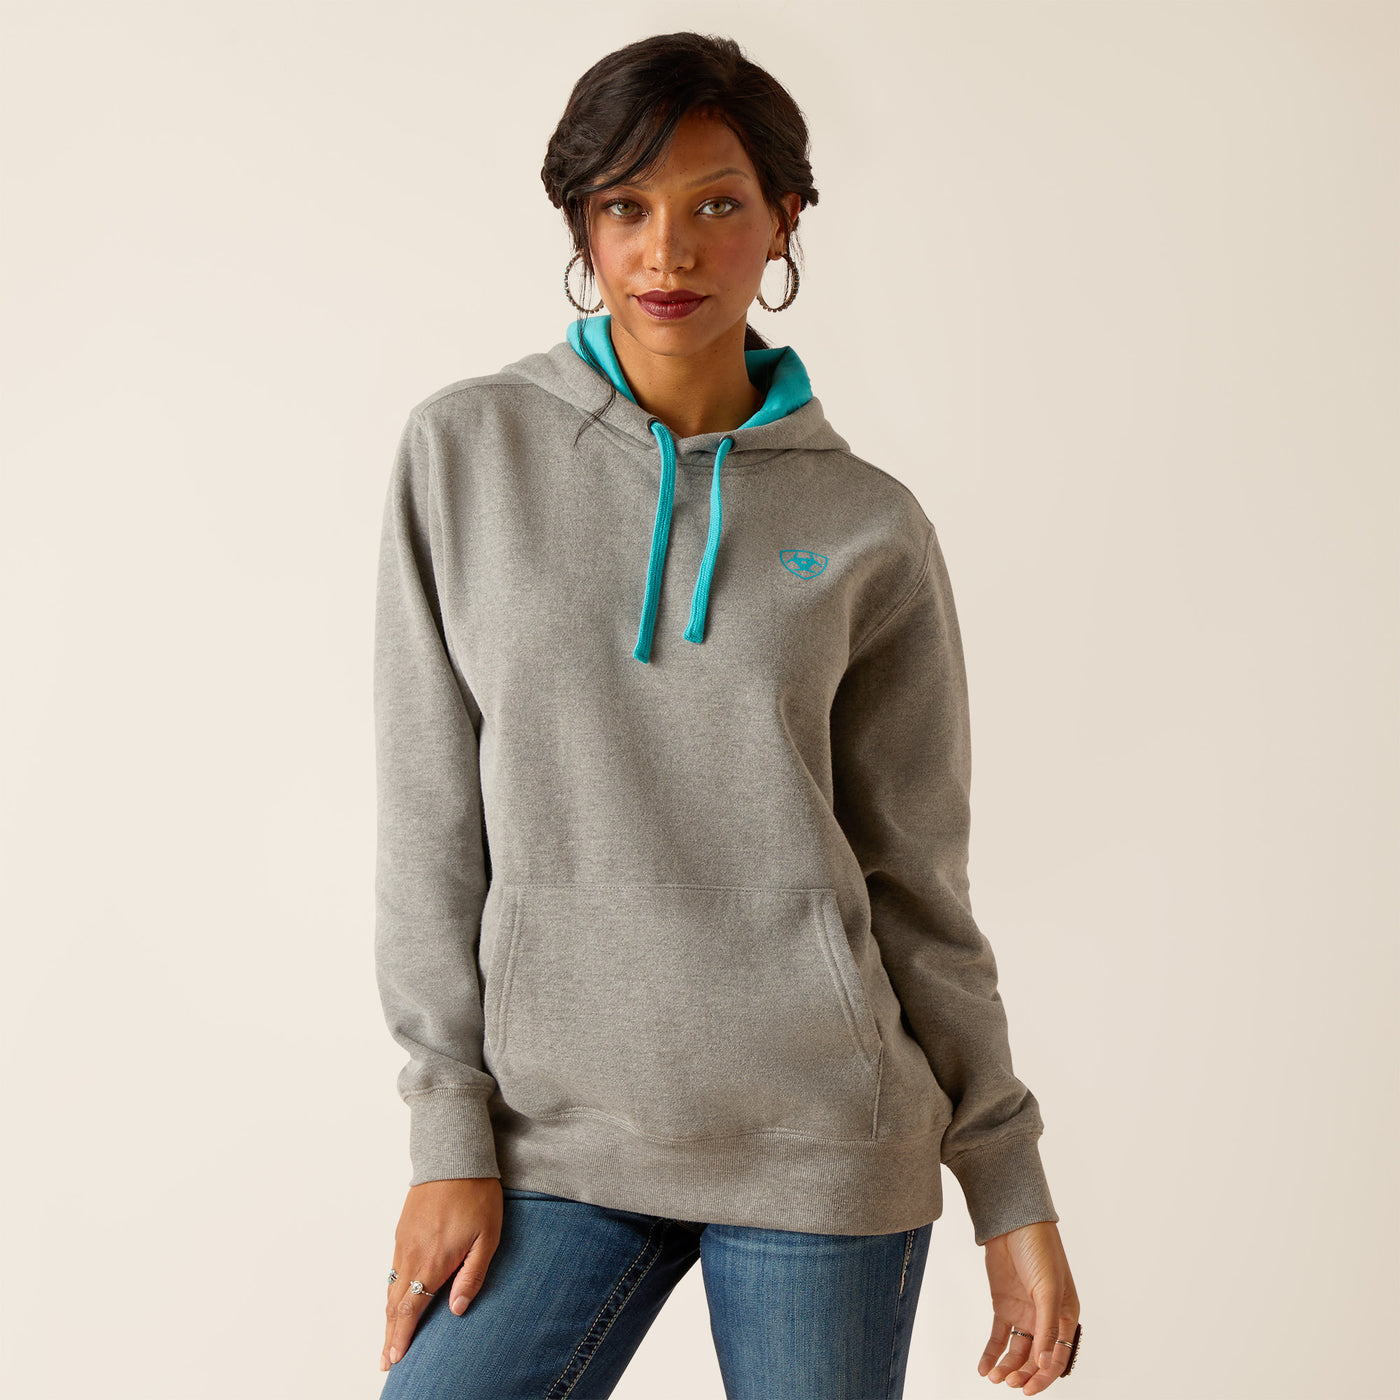 Ariat Equipment Hoodie [Heathered Grey] ✜ON SALE NOW: 25% OFF✜